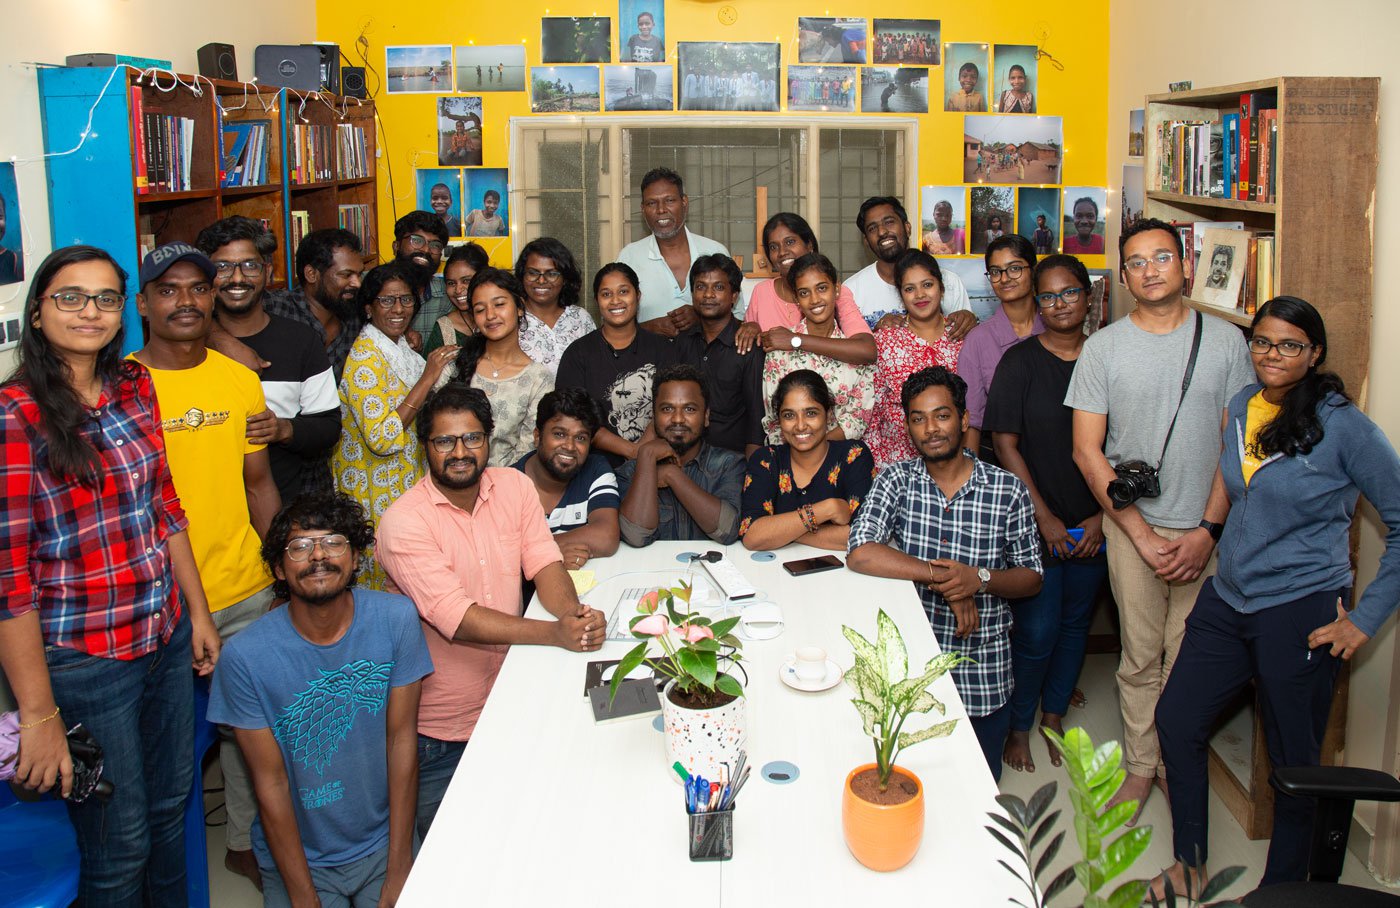 Palani's friends at his studio's opening day. The studio has produced 3 journalism students and 30 photographers all over Tamil Nadu.